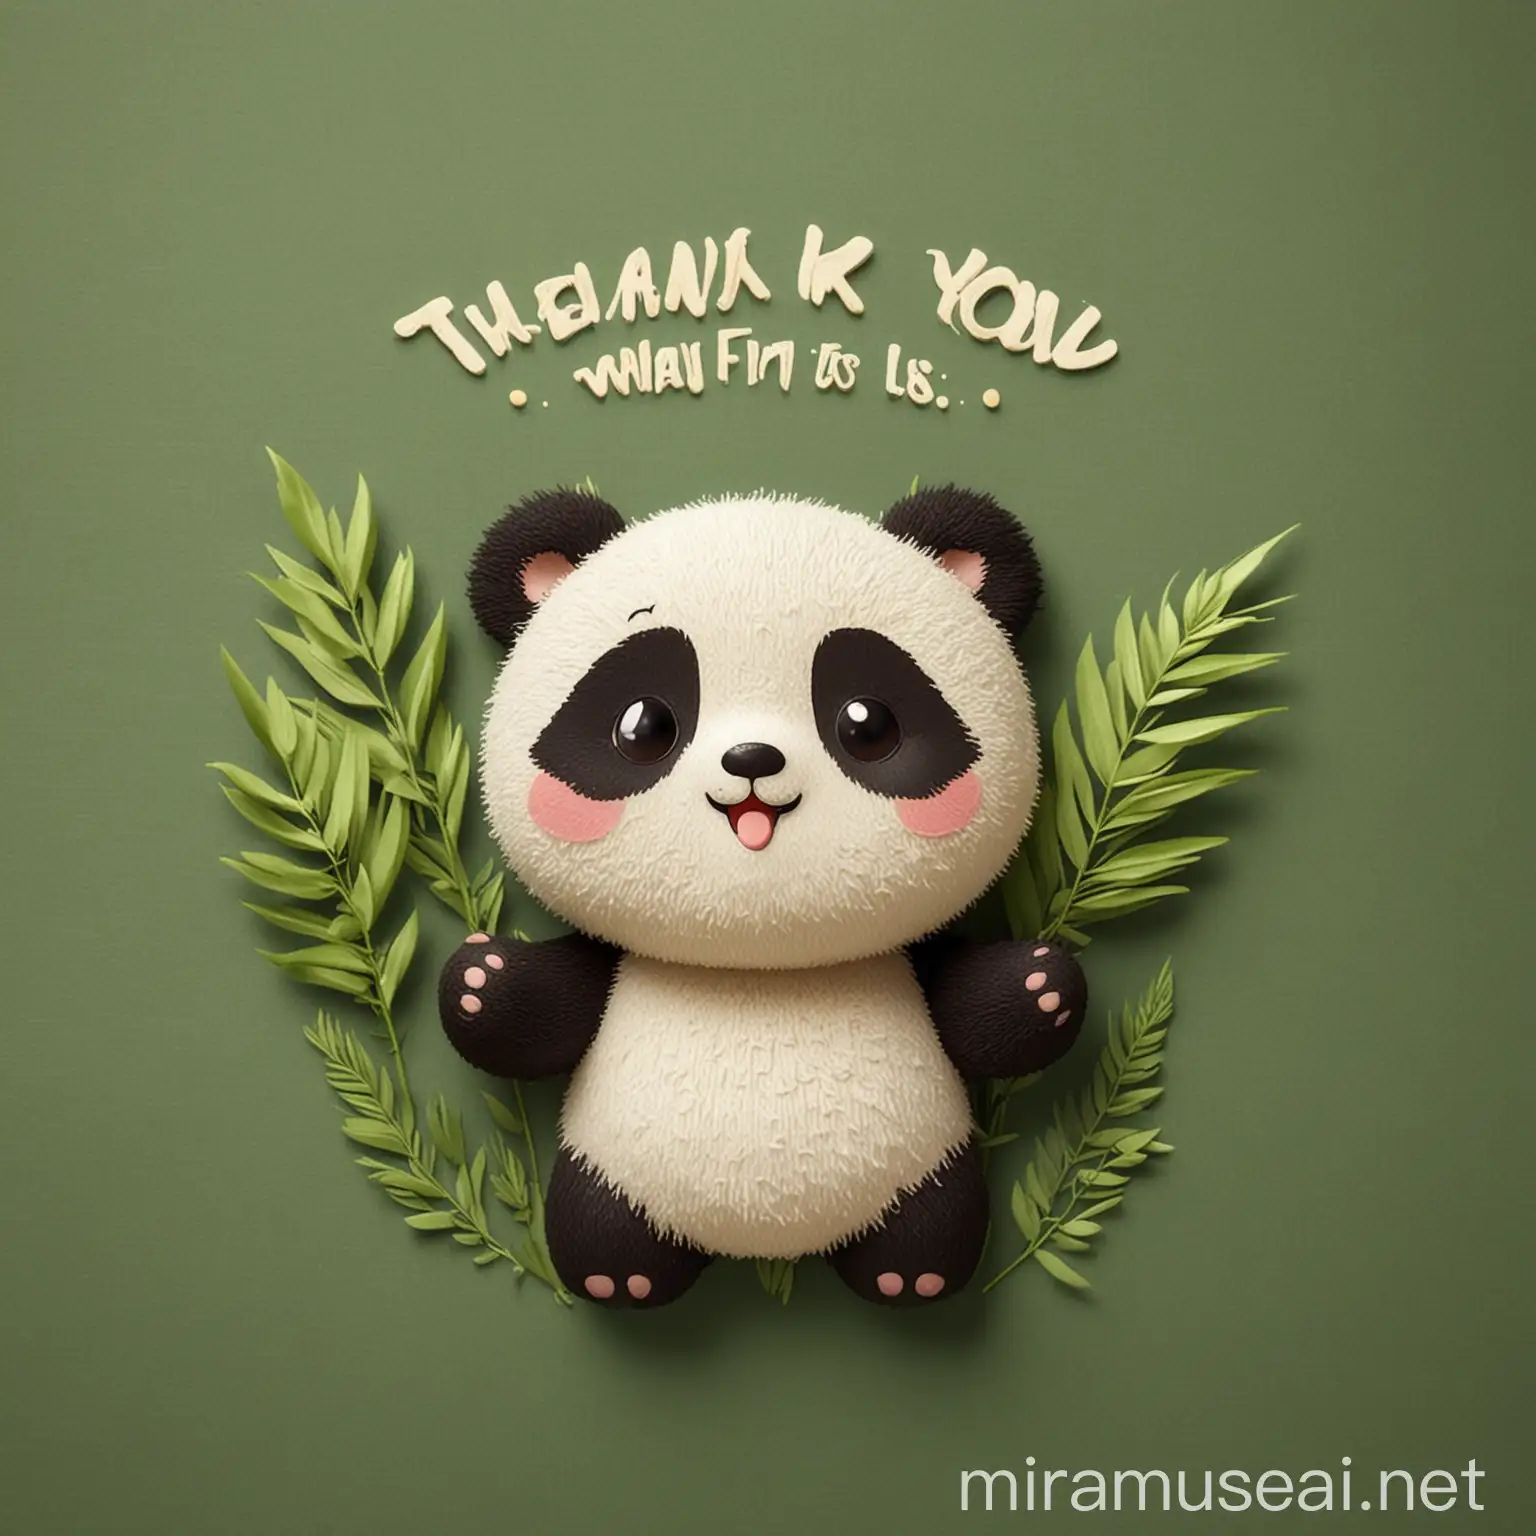 Cute Panda Sprite Giggling and Saying Thank You with Asian Style Pressed Palms